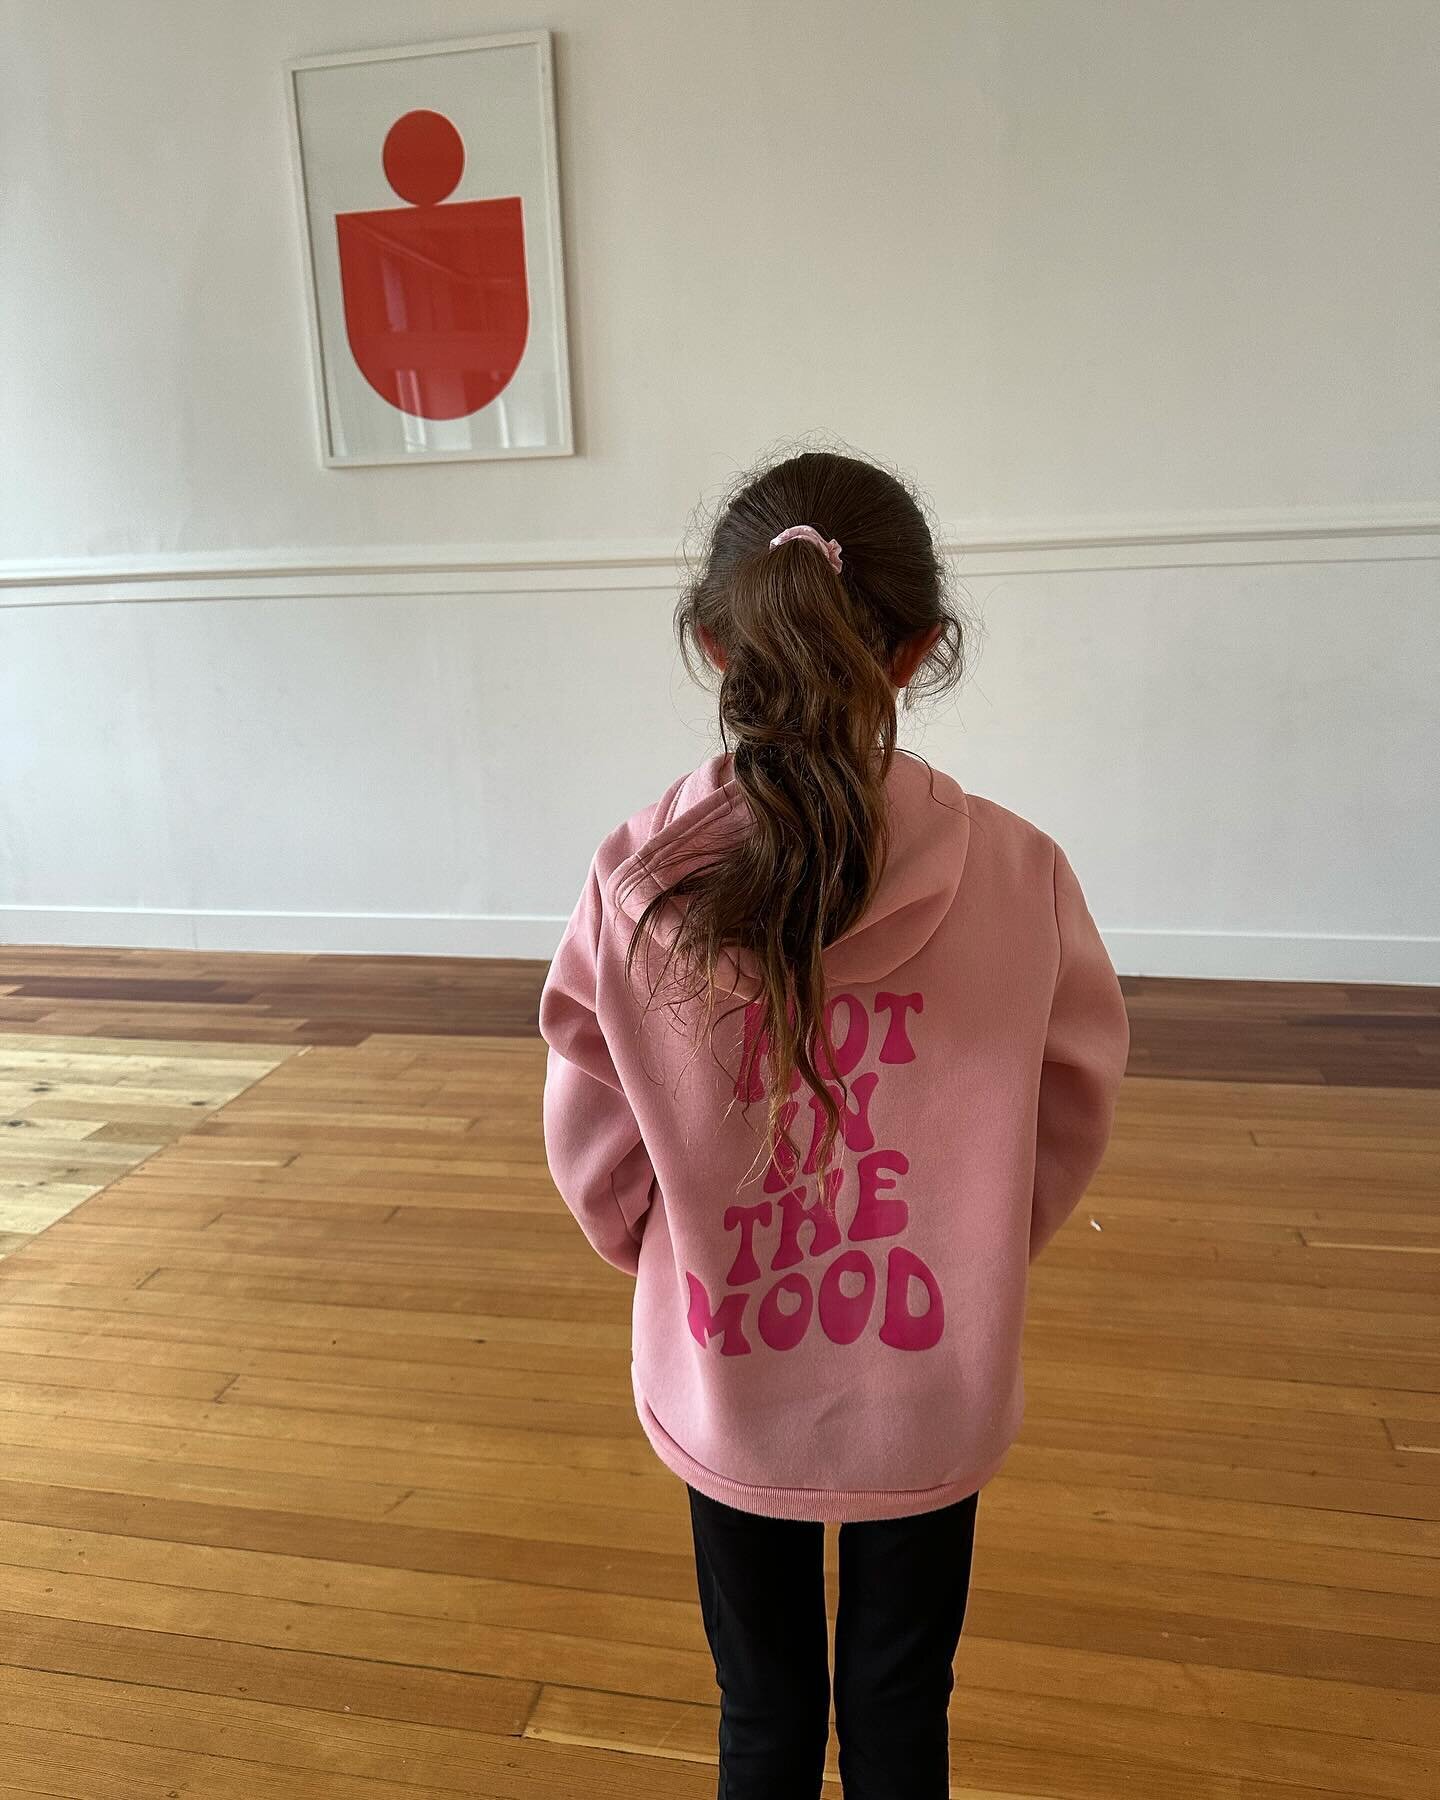 Not in the Mood - Katie&rsquo;s jumper yesterday was on brand! Delighted to see classes so busy this year, our MOOD GIRLS crew is growing 🧡 

If you have any questions about joining classes feel free to DM me or send an email to moodteenyoga@gmail.c